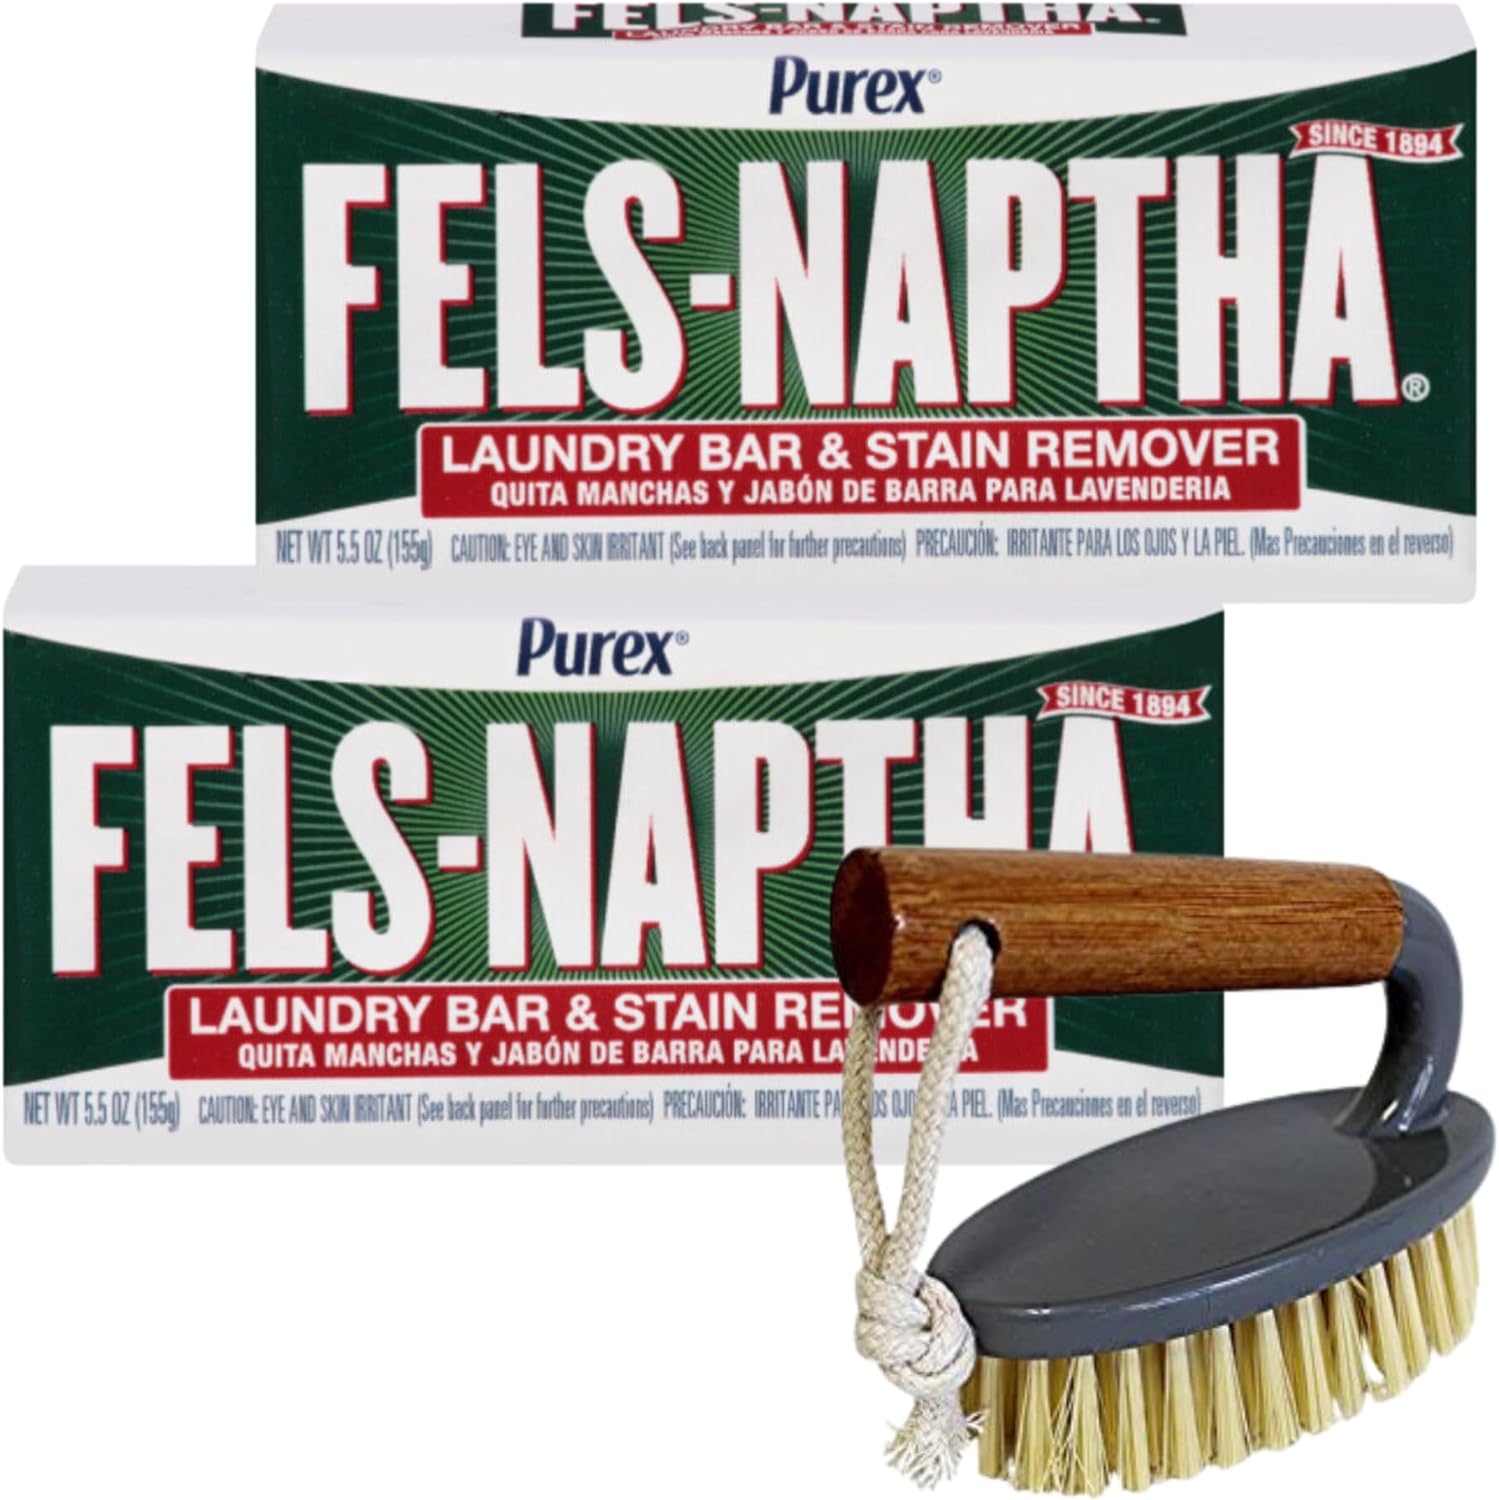 Fels-Naptha Laundry Detergent Bar Soap and Stain Remover Bundle - Includes 2 (5-ounce) Fels Naptha Laundry Bar, Eco Bamboo Laundry Scrub Brush, DIY Laundry Detergent Recipe by FOXTAIL COLLECTIVE